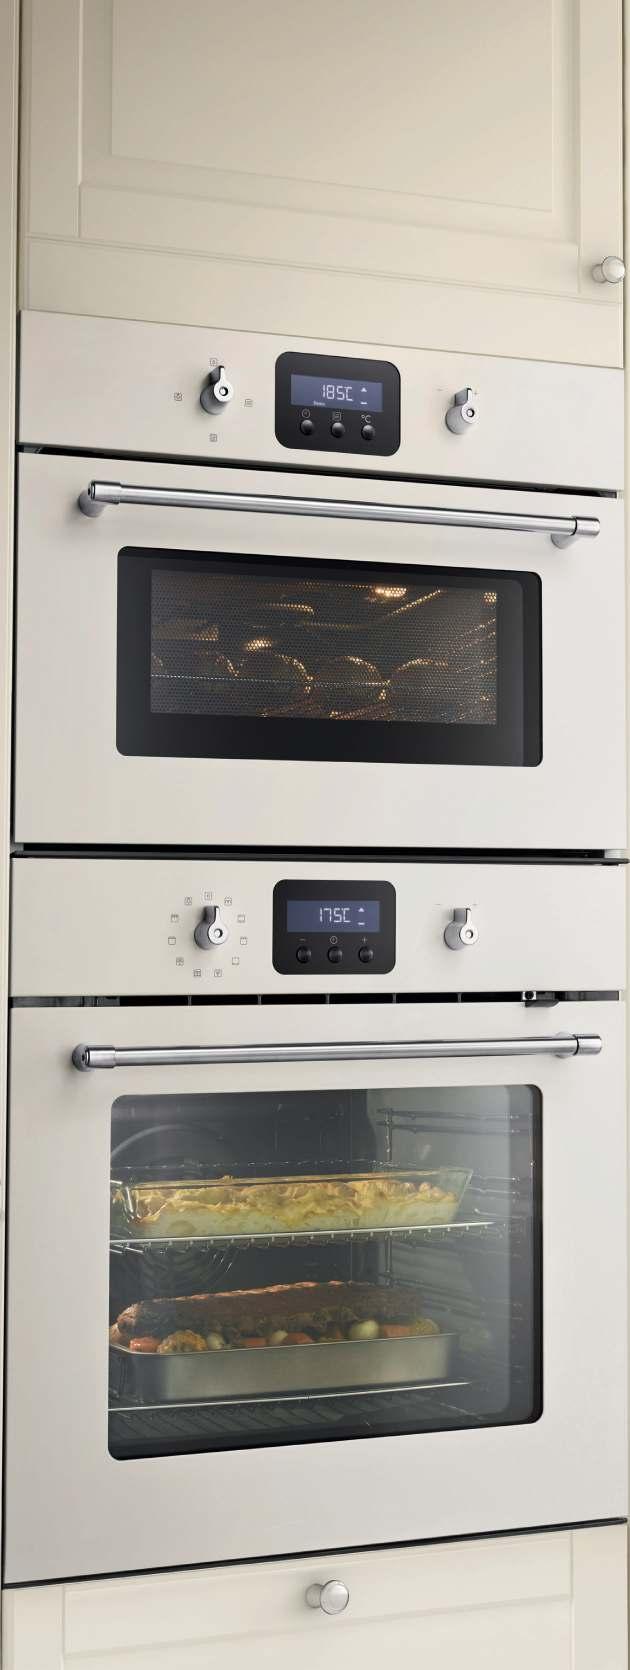 30 The perfect match for your cooking needs. GRÄNSLÖS microwave oven 550 Stainless steel. 403.074.56 Easy to clean as the stainless steel surface is treated to repel fingerprints.